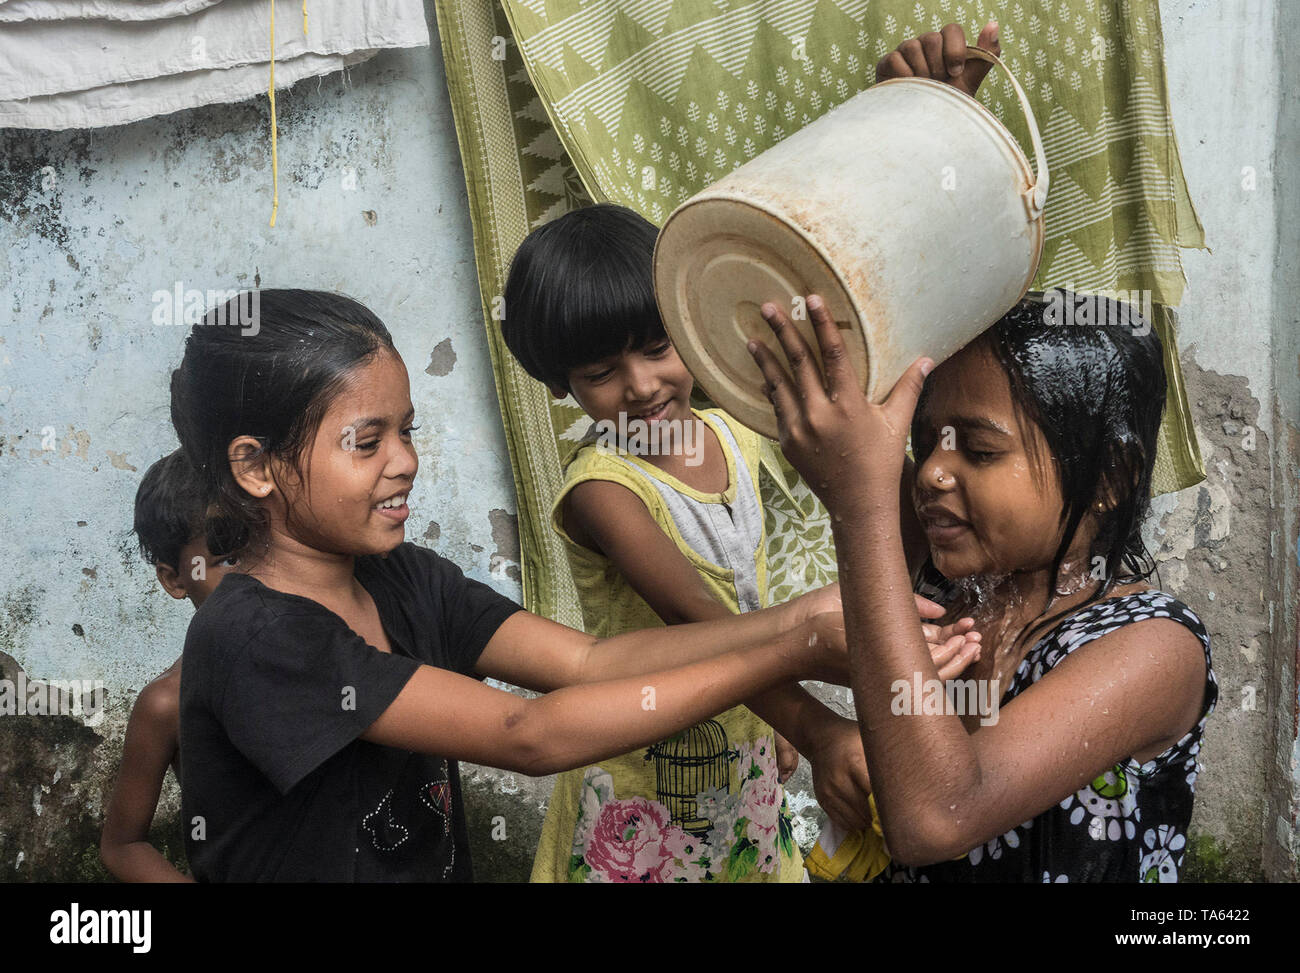 Kolkata. 22nd May, 2019. Indian children cool themselves at a slum area in a hot summer afternoon in Kolkata, India on May 22, 2019. Credit: Tumpa Mondal/Xinhua/Alamy Live News Stock Photo